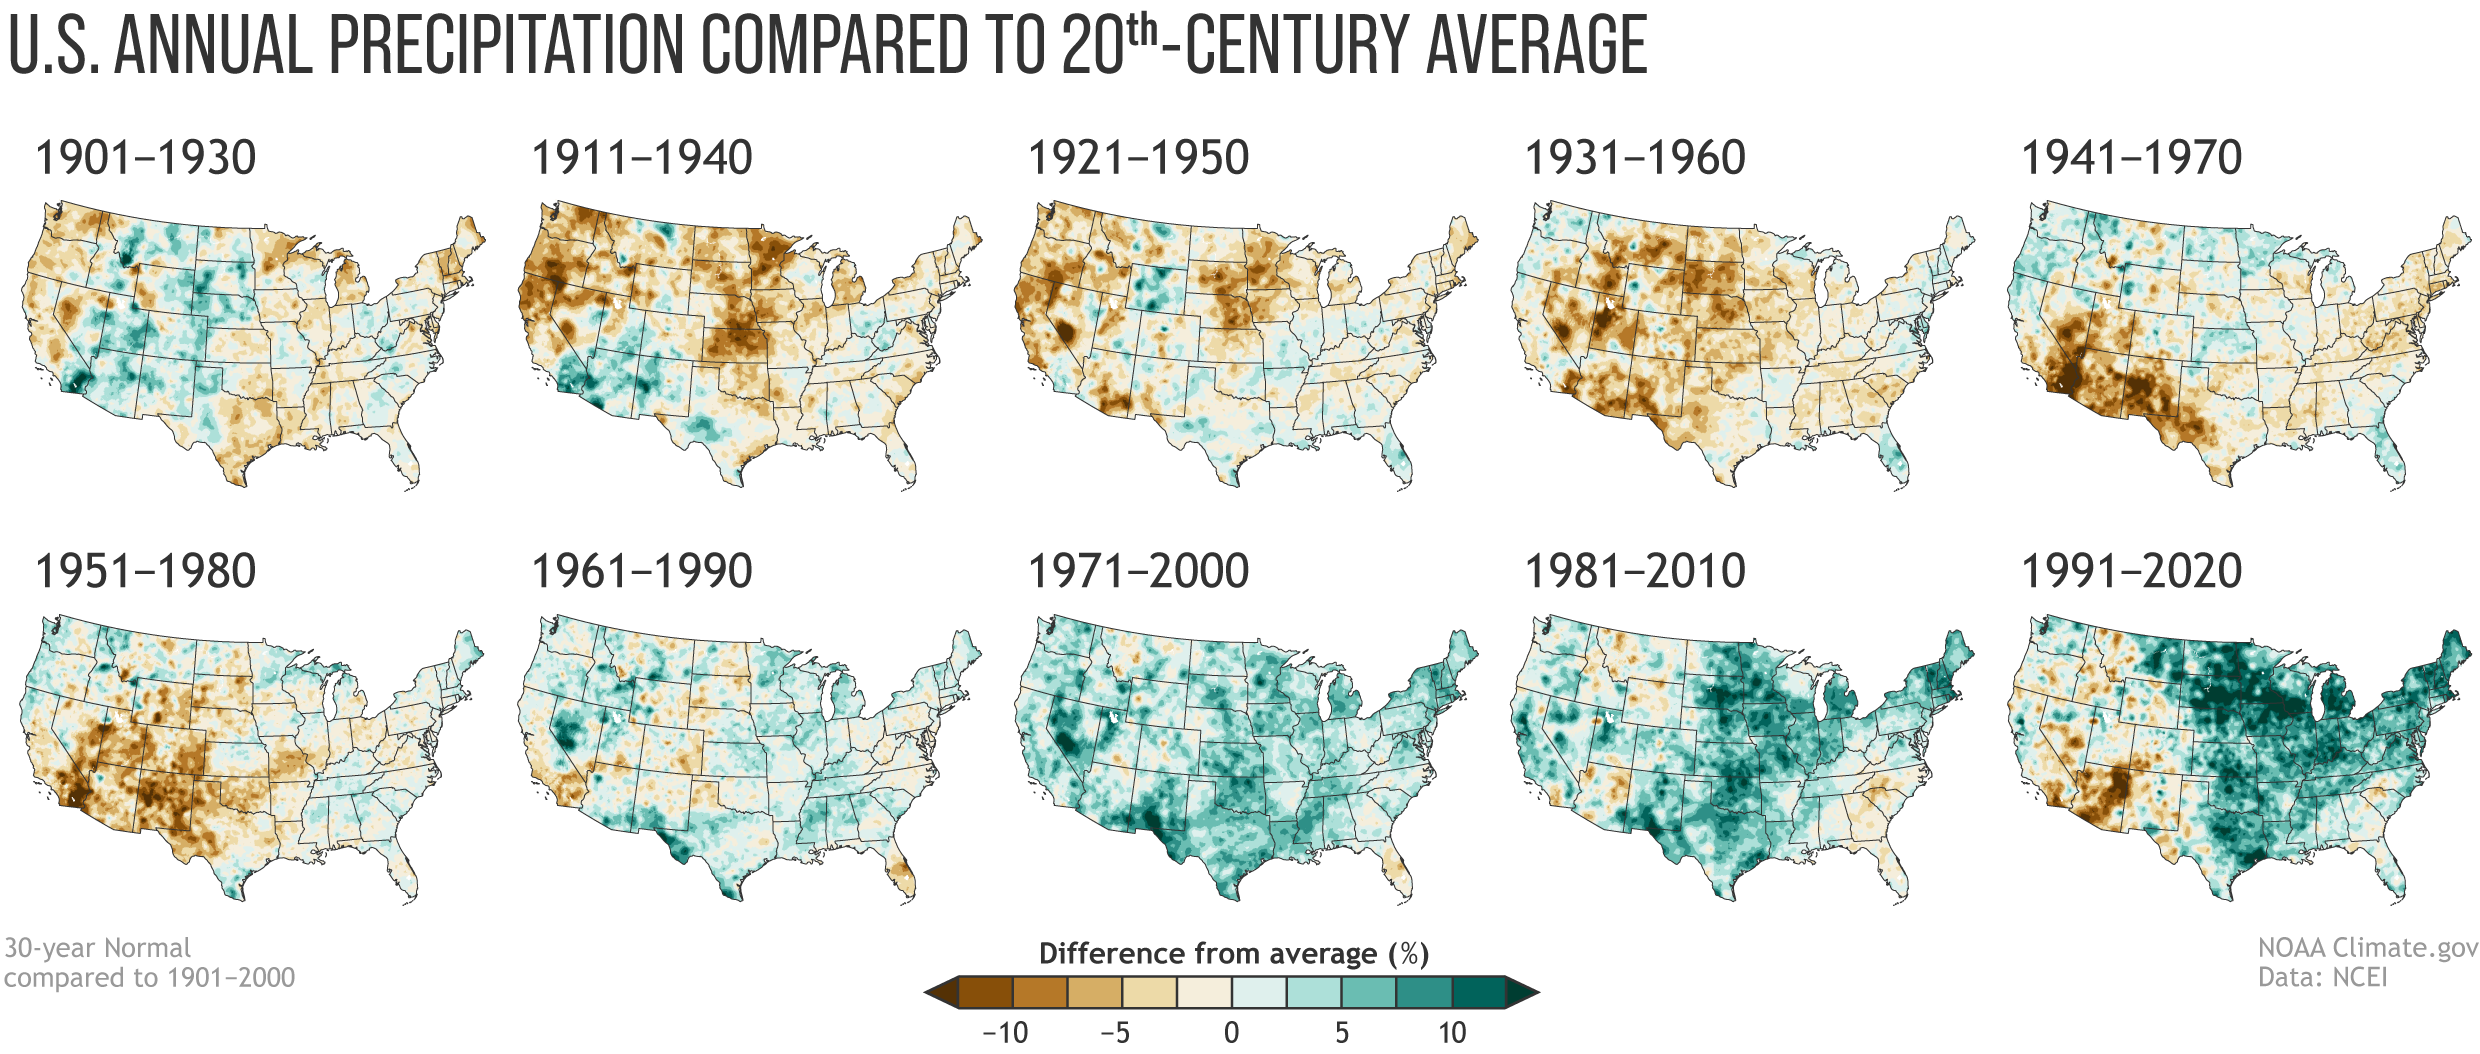 Normal annual U.S. precipitation as a percent of the 20th-century average for each U.S. Climate Normals period from 1901-1930 (upper left) to 1991-2020 (lower right). Places where the normal annual precipitation was 12.5 percent or more below the 20th-century average are darkest brown; places where normal annual precipitation was 12.5 percent or more wetter than the 20th-century average are darkest green. Maps by NOAA Climate.gov, based on analysis by Jared Rennie, North Carolina Institute for Climate